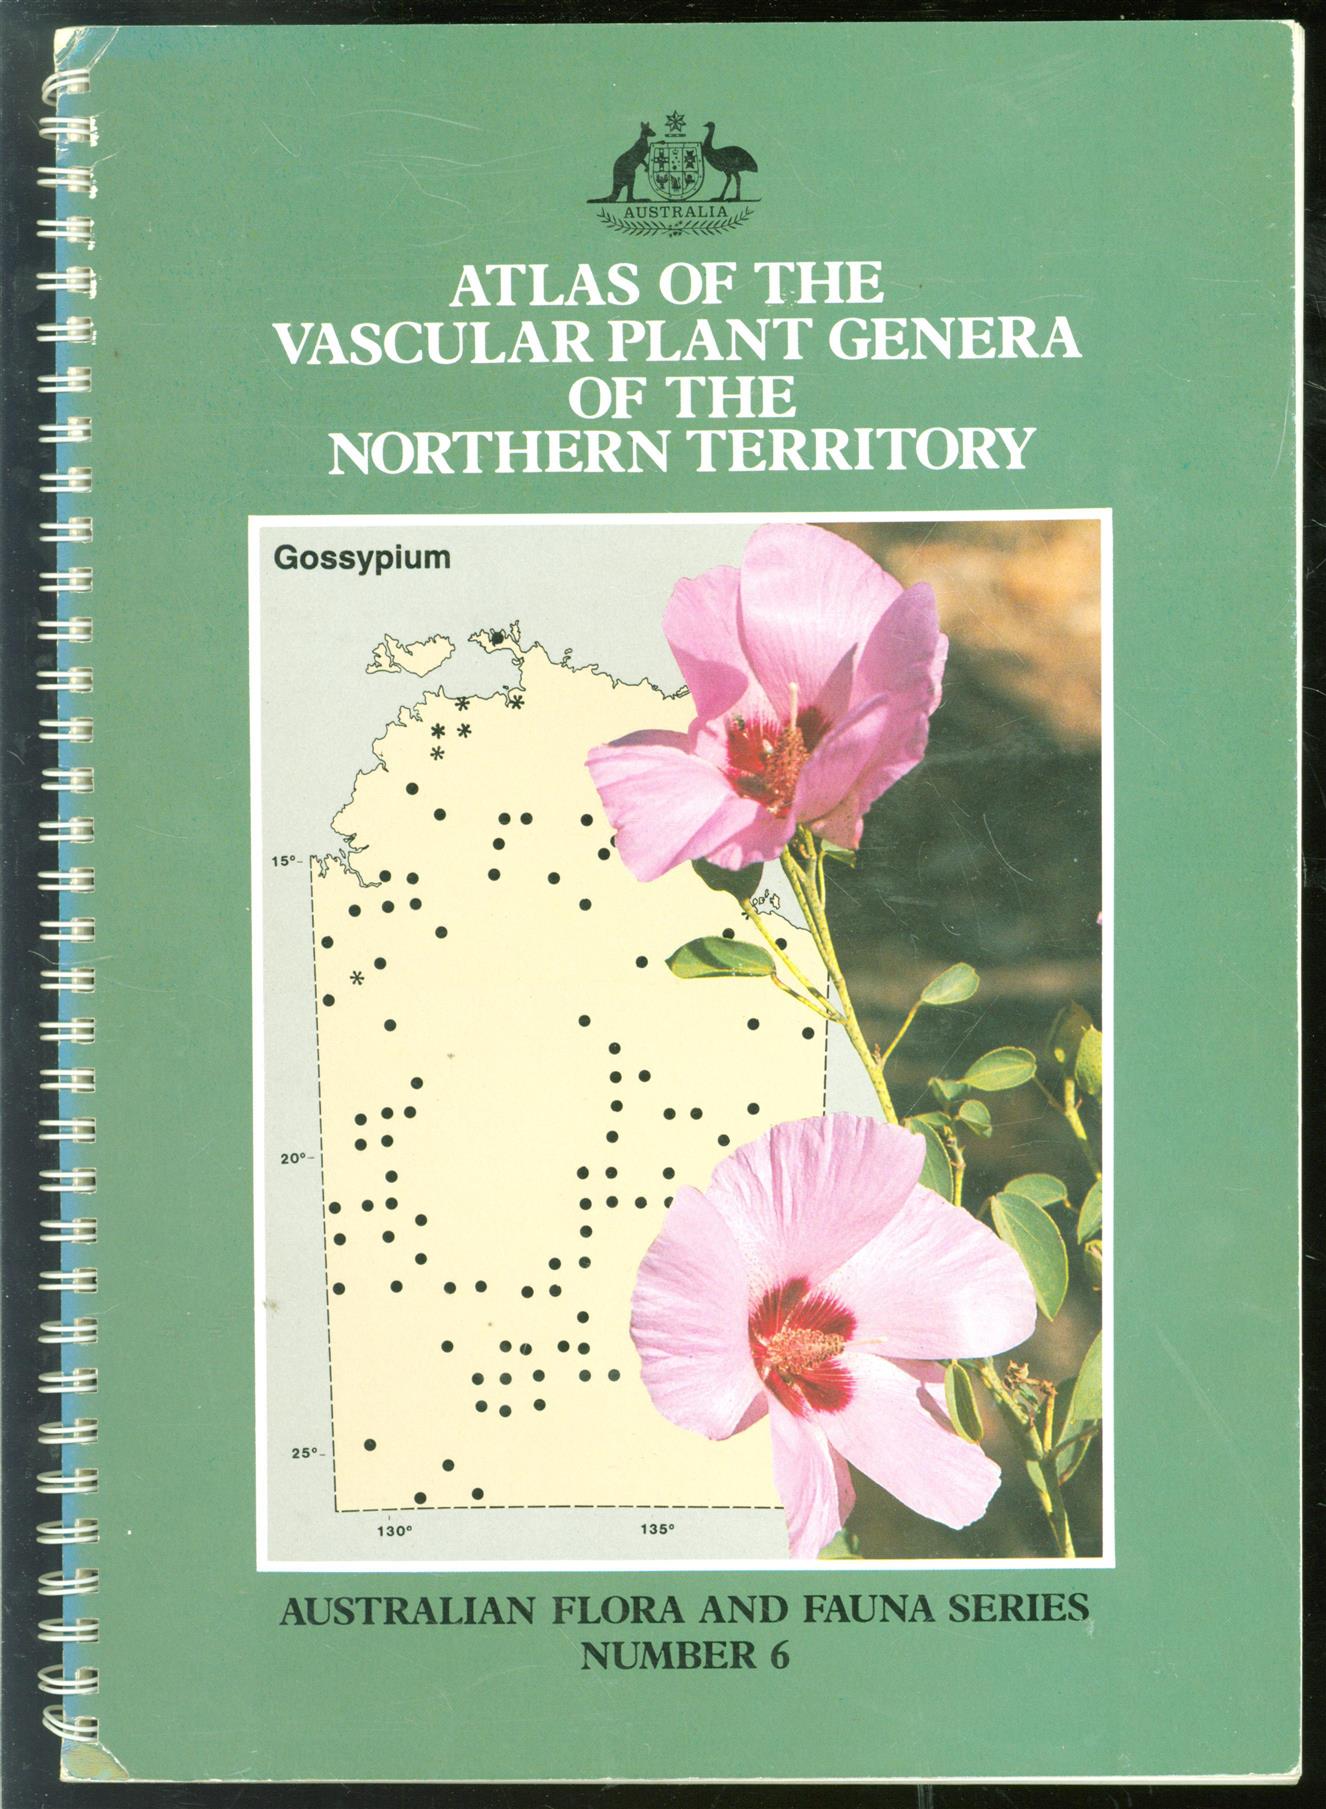 C. R. Dunlop, D. M. J. S. Bowman - Atlas of the vascular plant genera of the Northern Territory